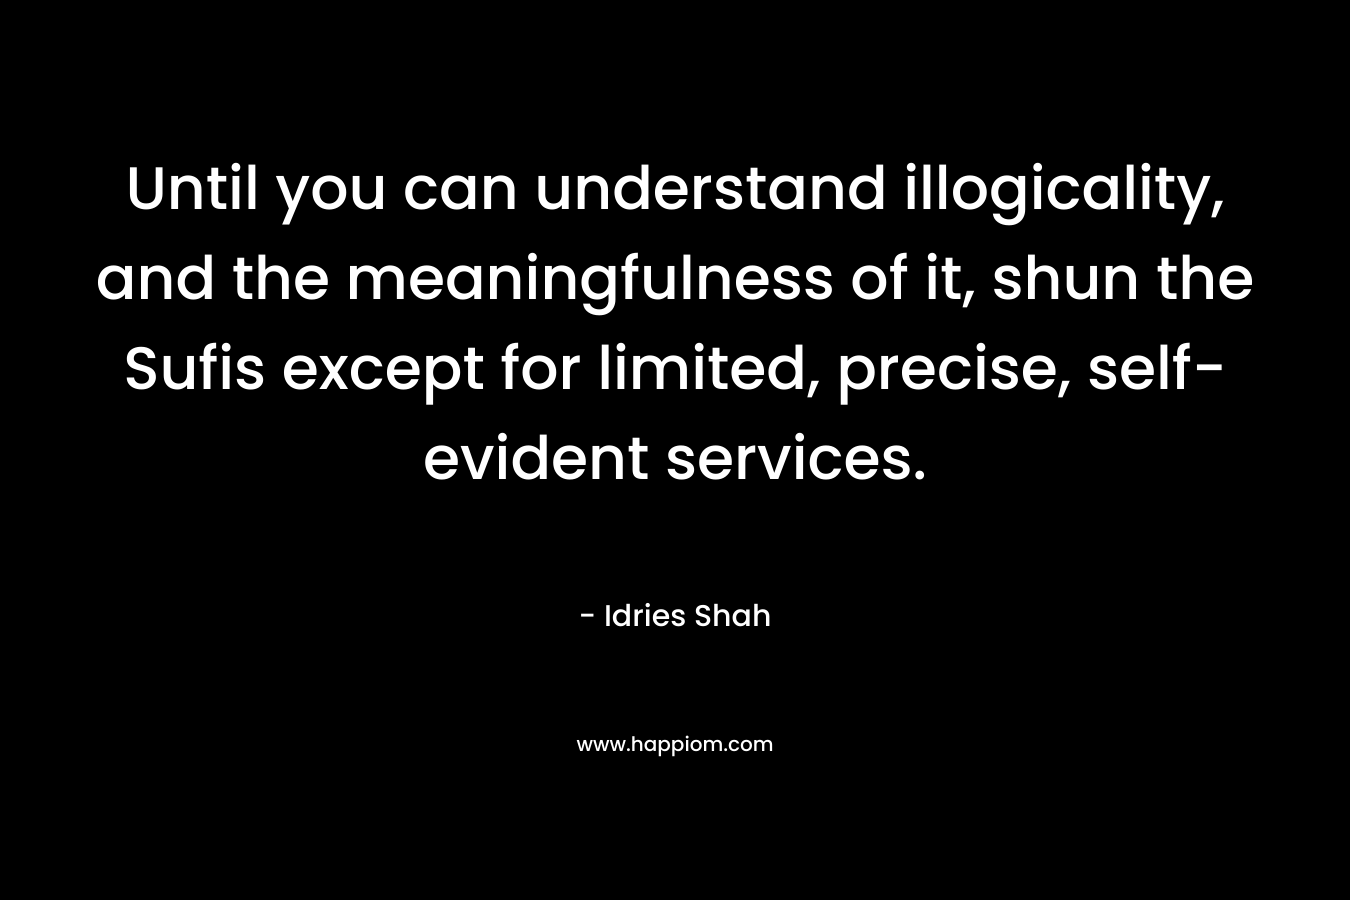 Until you can understand illogicality, and the meaningfulness of it, shun the Sufis except for limited, precise, self-evident services. – Idries Shah